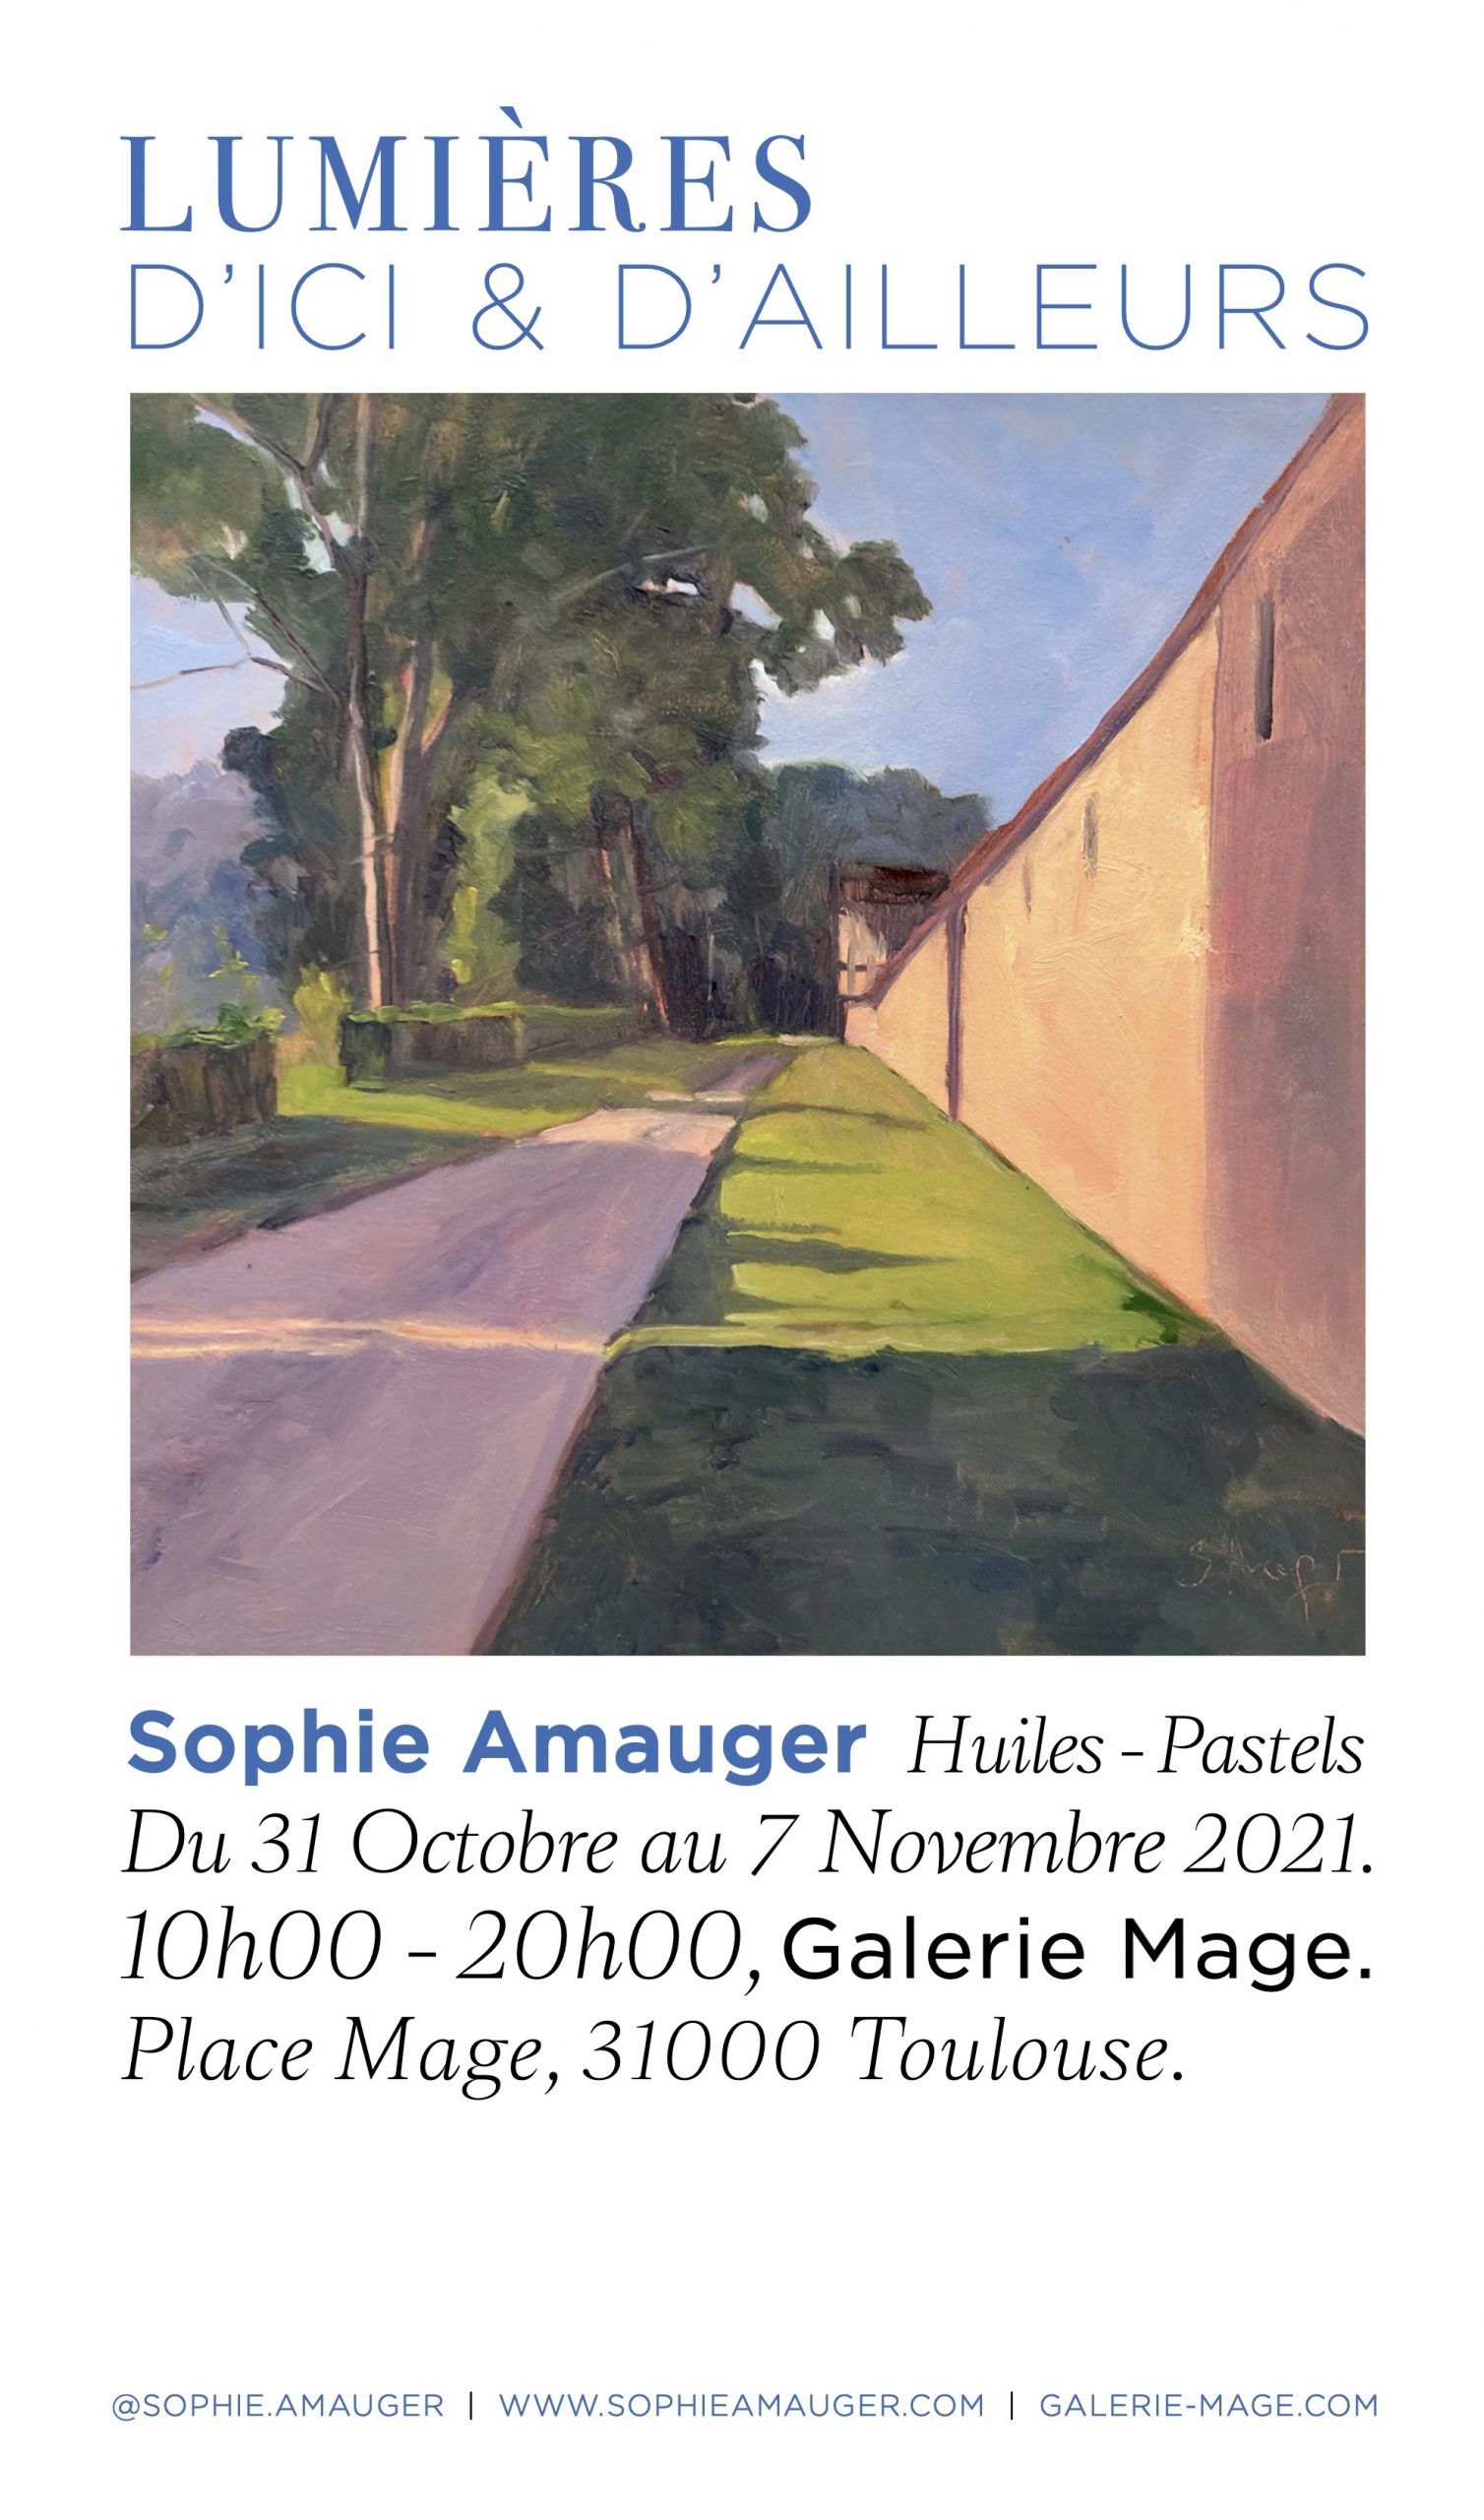 Galerie Mage - Sophie Amauger